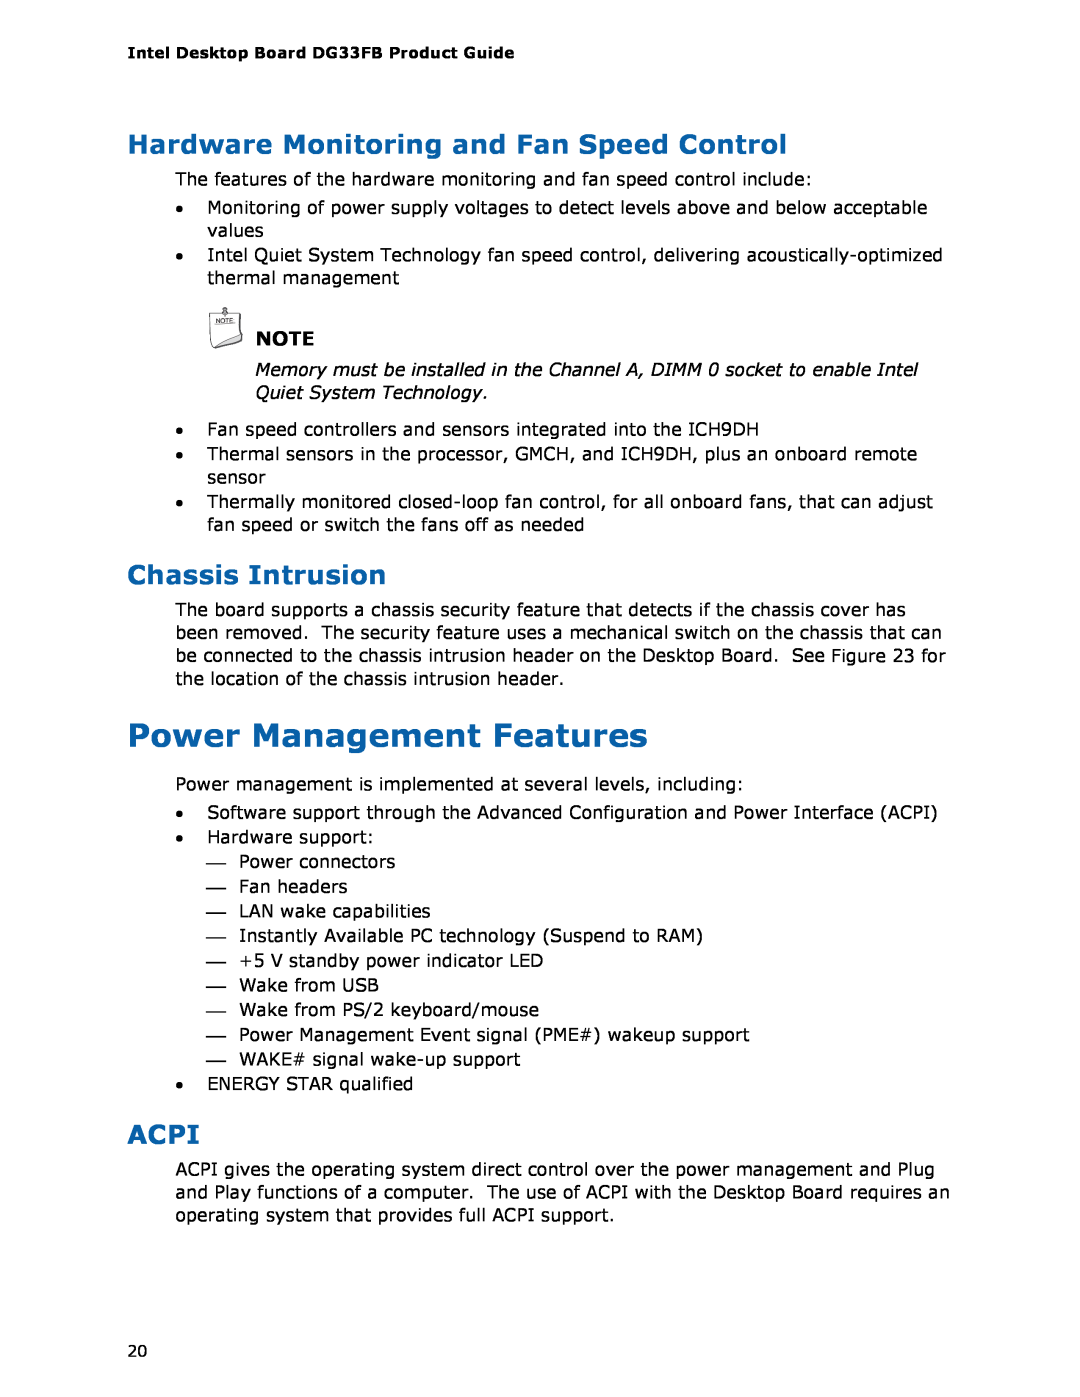 Intel DG33FB manual Power Management Features, Hardware Monitoring and Fan Speed Control, Chassis Intrusion, Acpi 